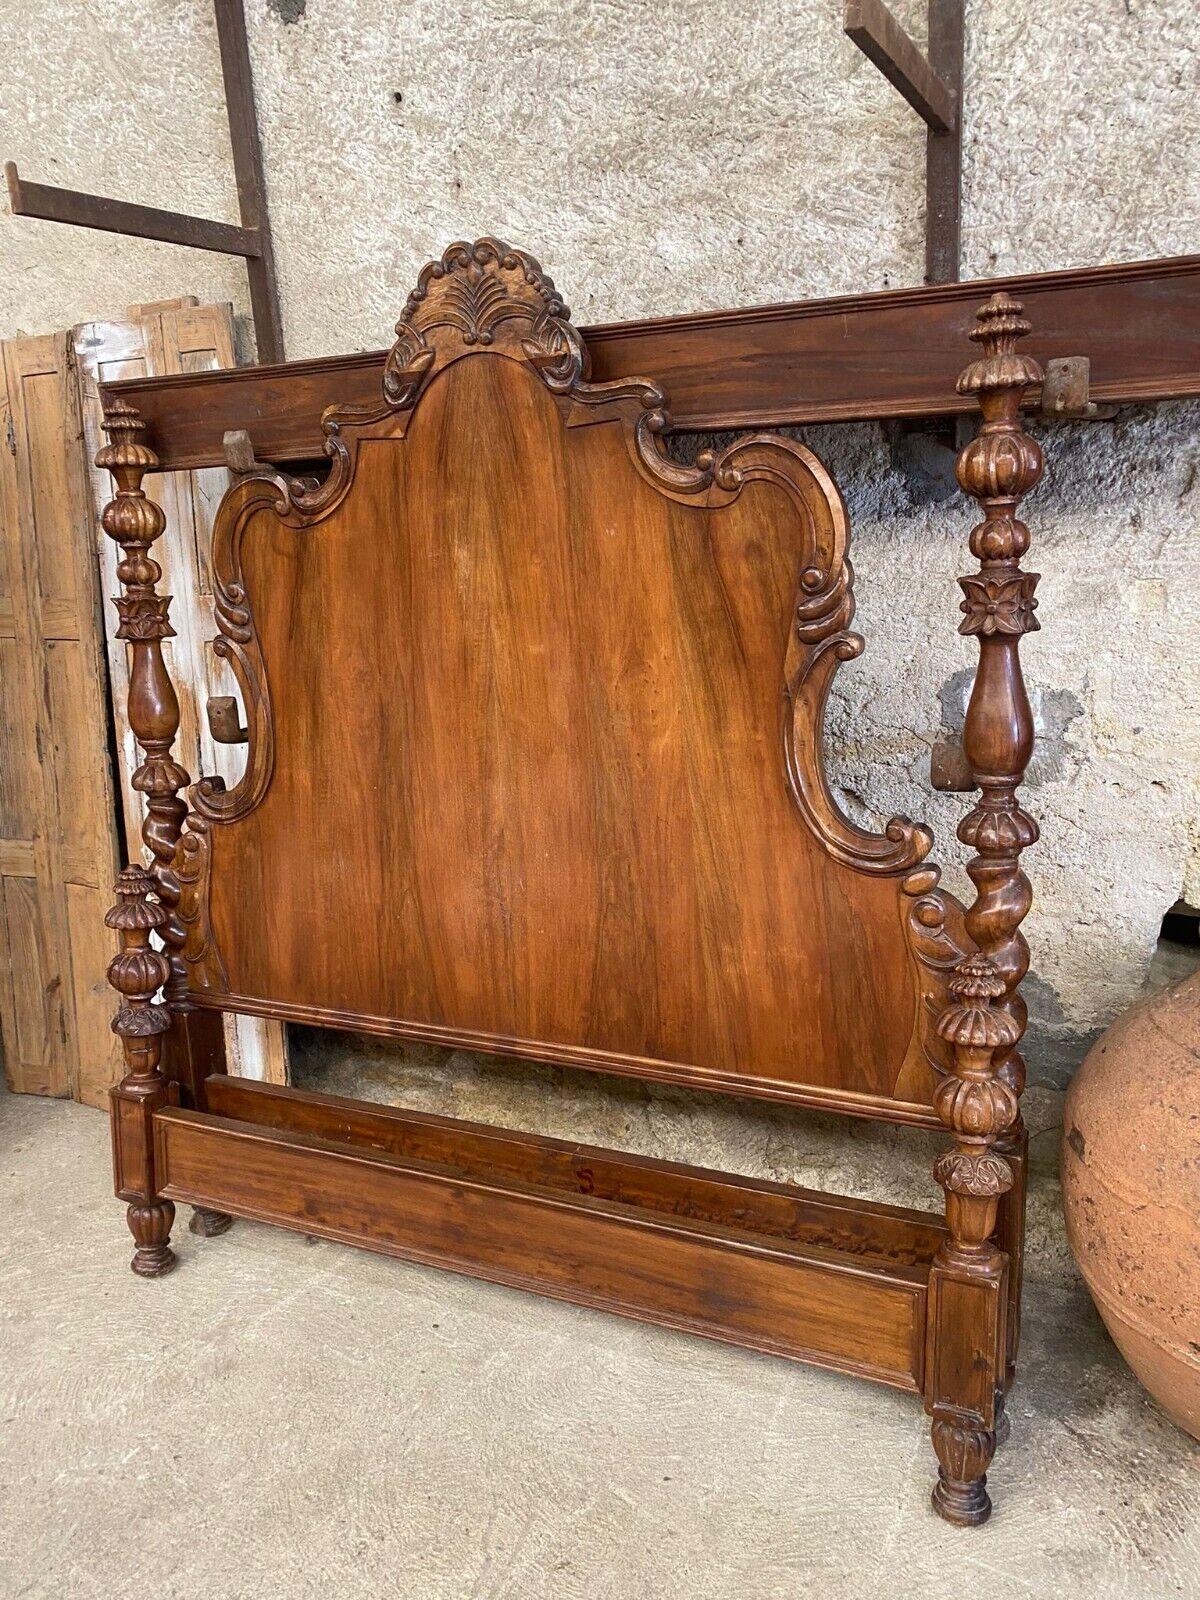 French Provincial French Bed 4 Poster King 19th Century Low Footboard